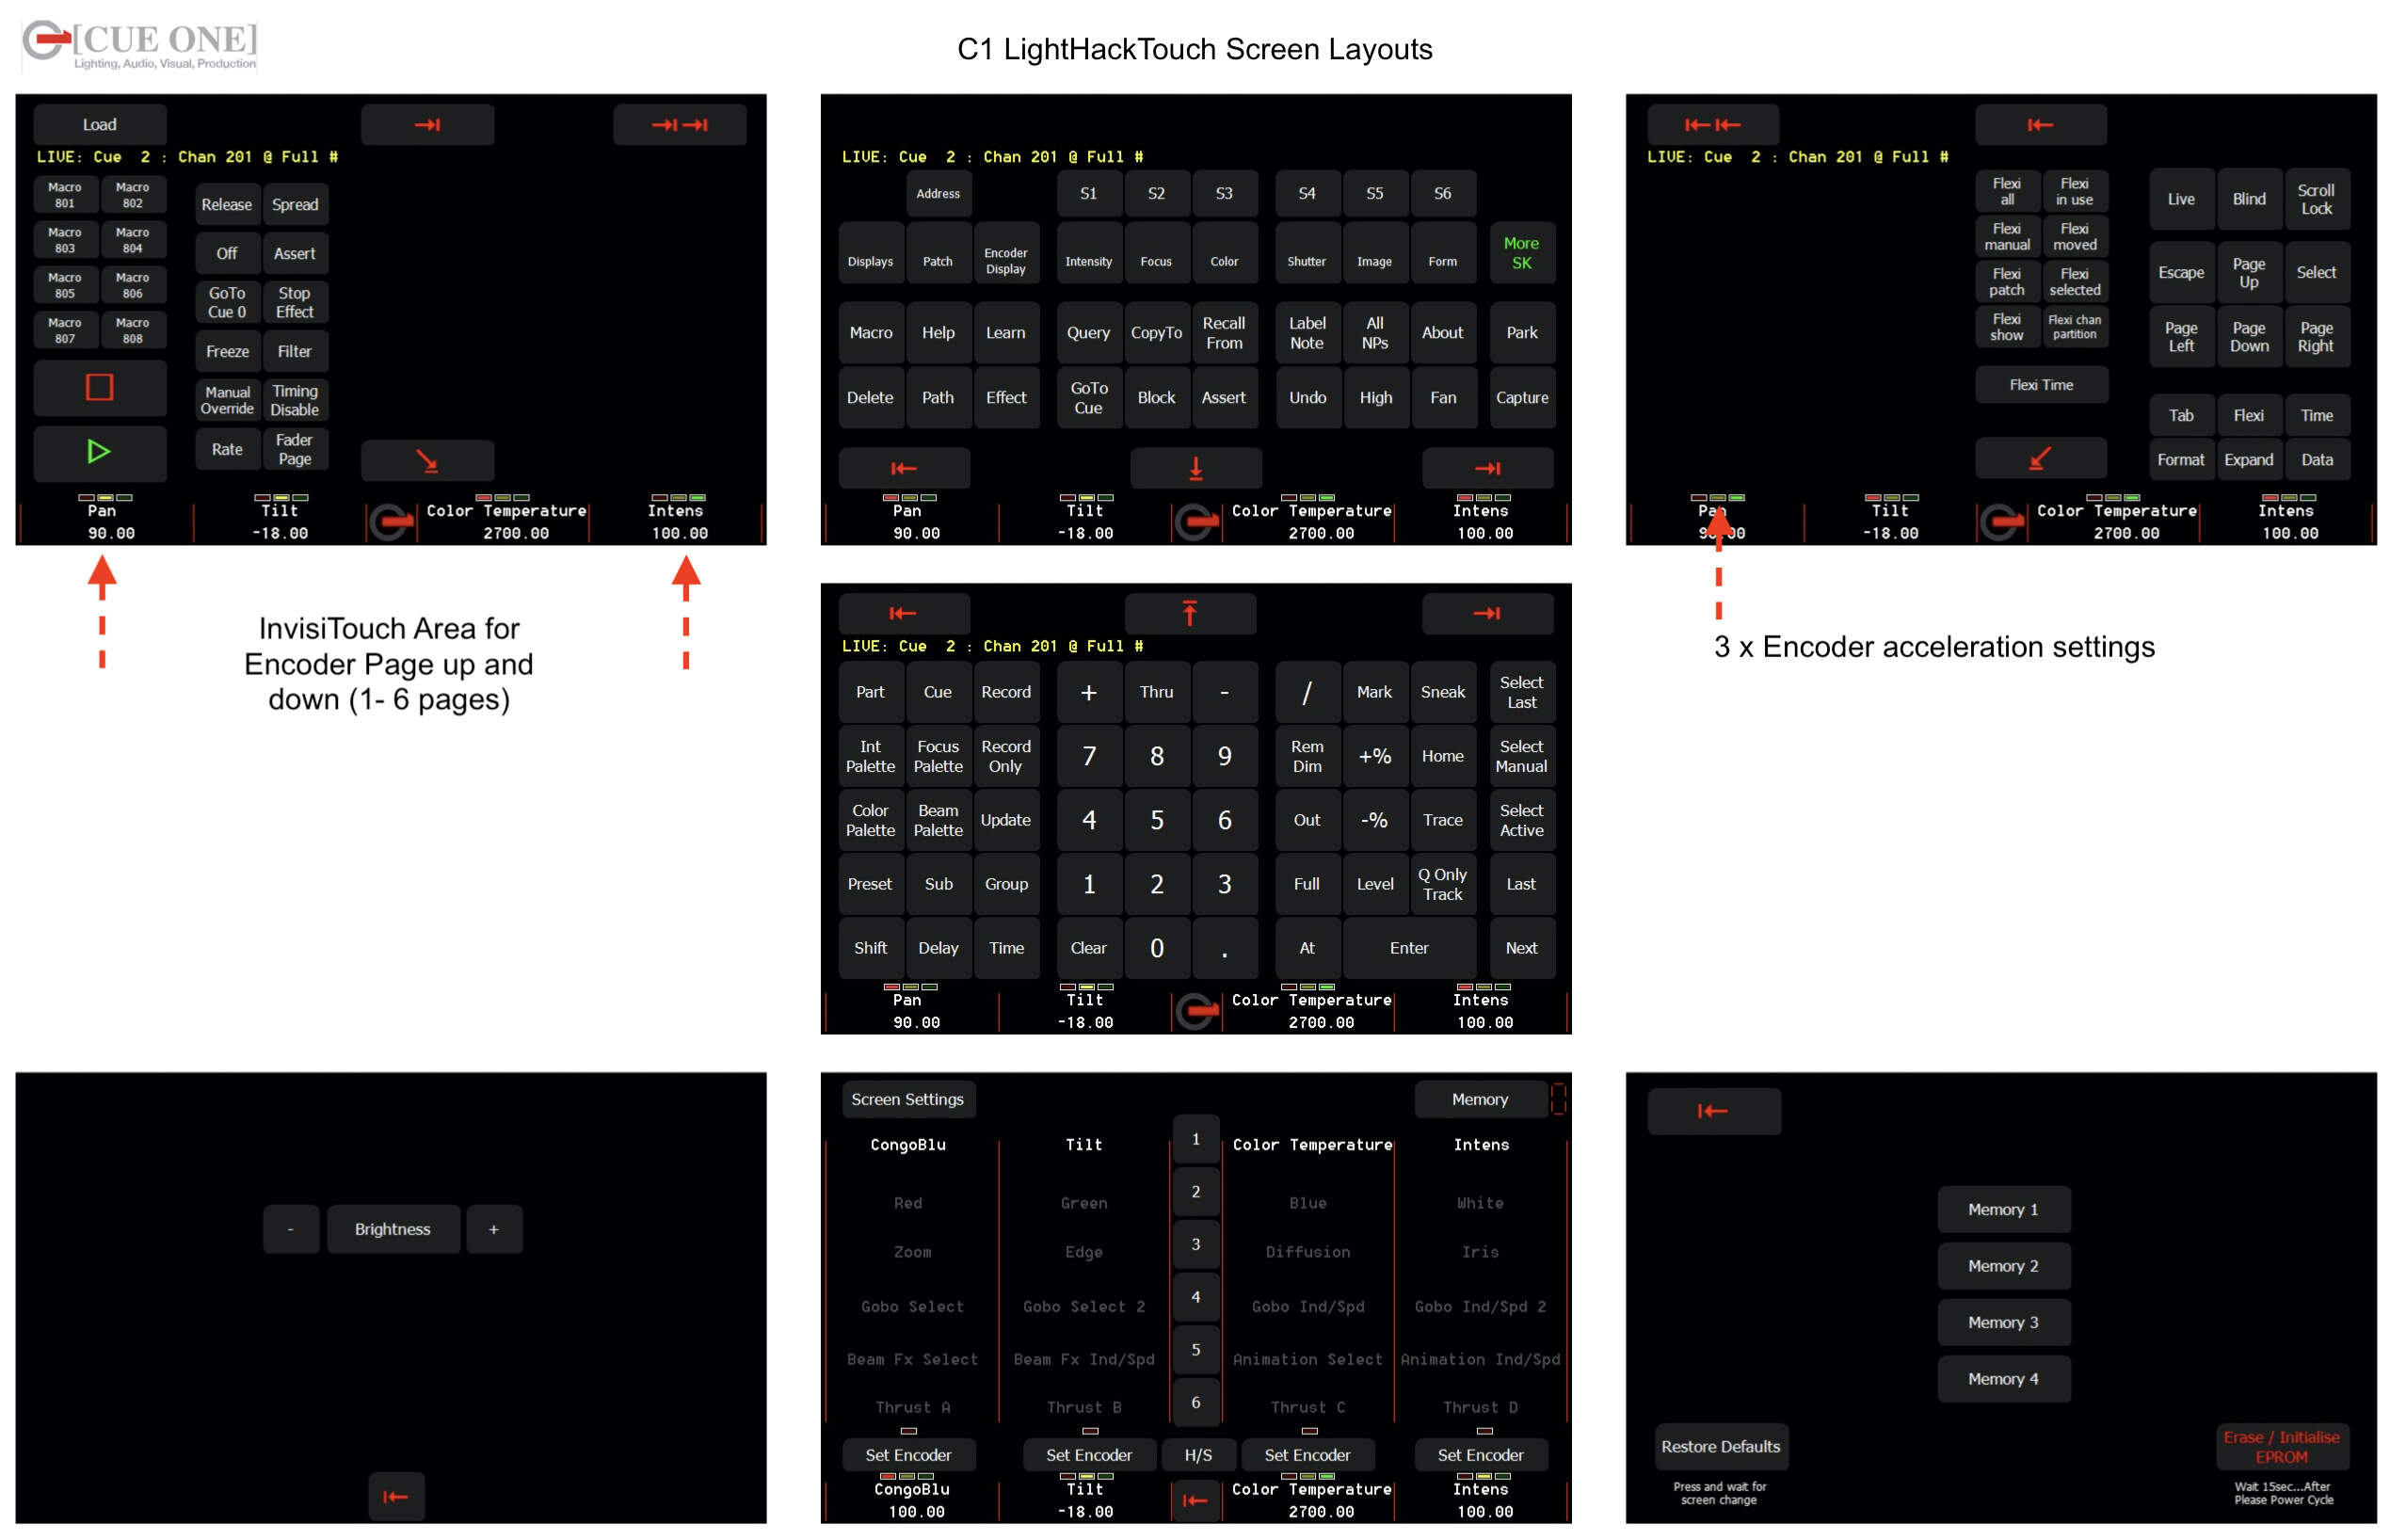 C1 Lighthack Touch (Black Edition)